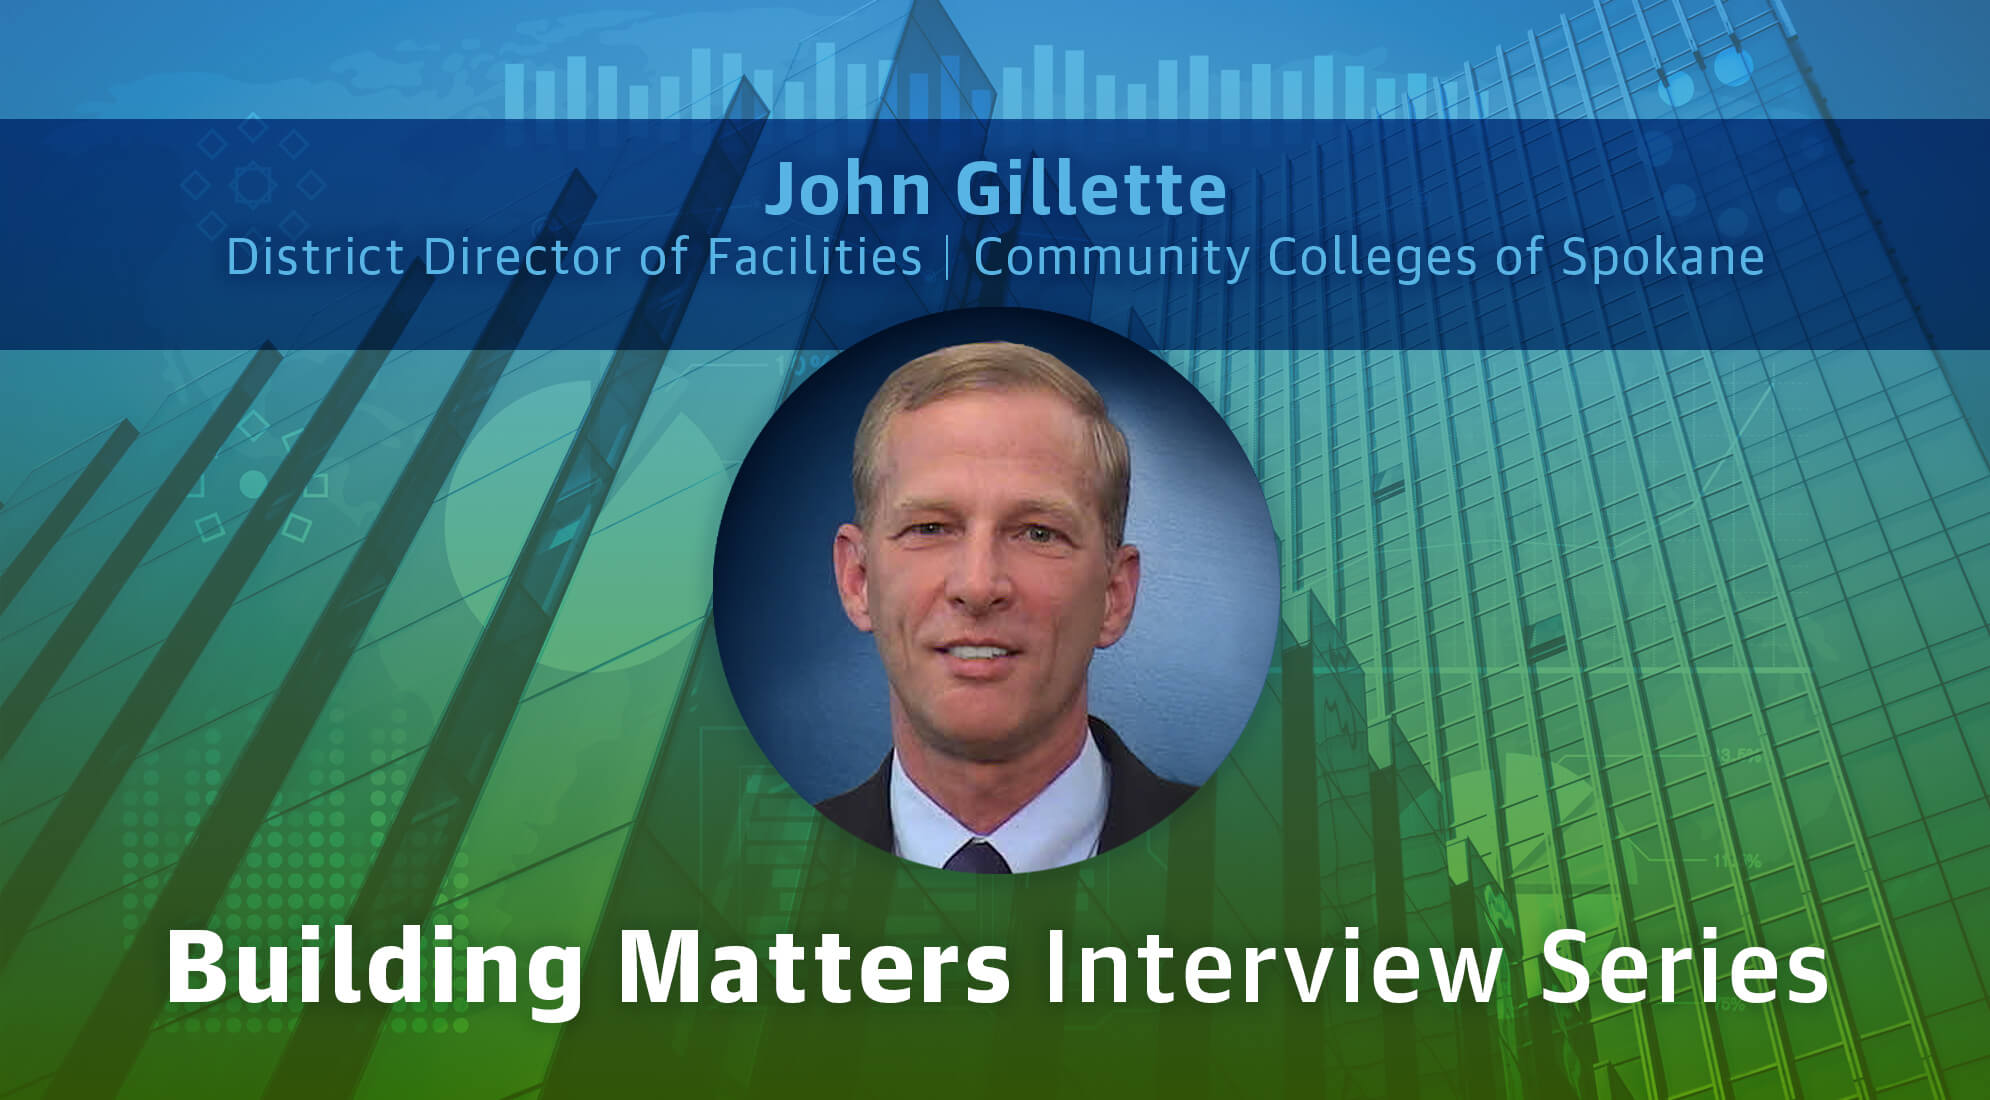 Community College Facilities Insights from John Gillette 2